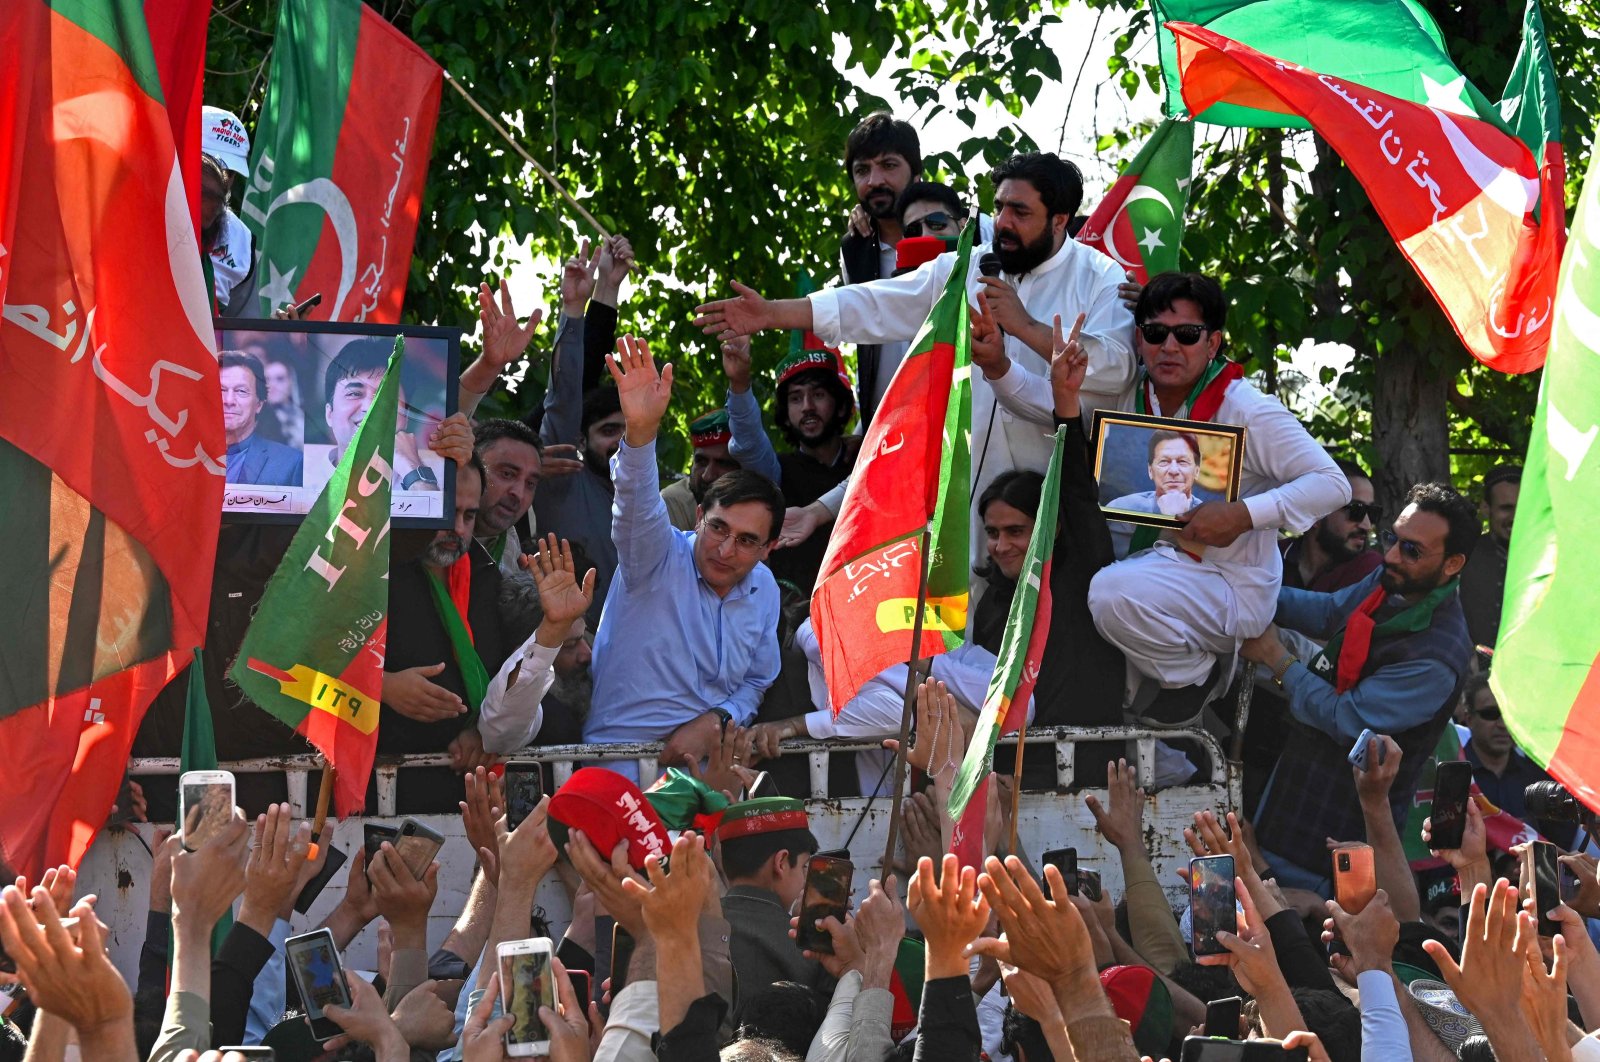 Pakistan Tehreek-e-Insaf (PTI) supporters take part in a protest rally for the release of Imran Khan, in Peshawar, Pakistan, March 31, 2024. (AFP Photo)